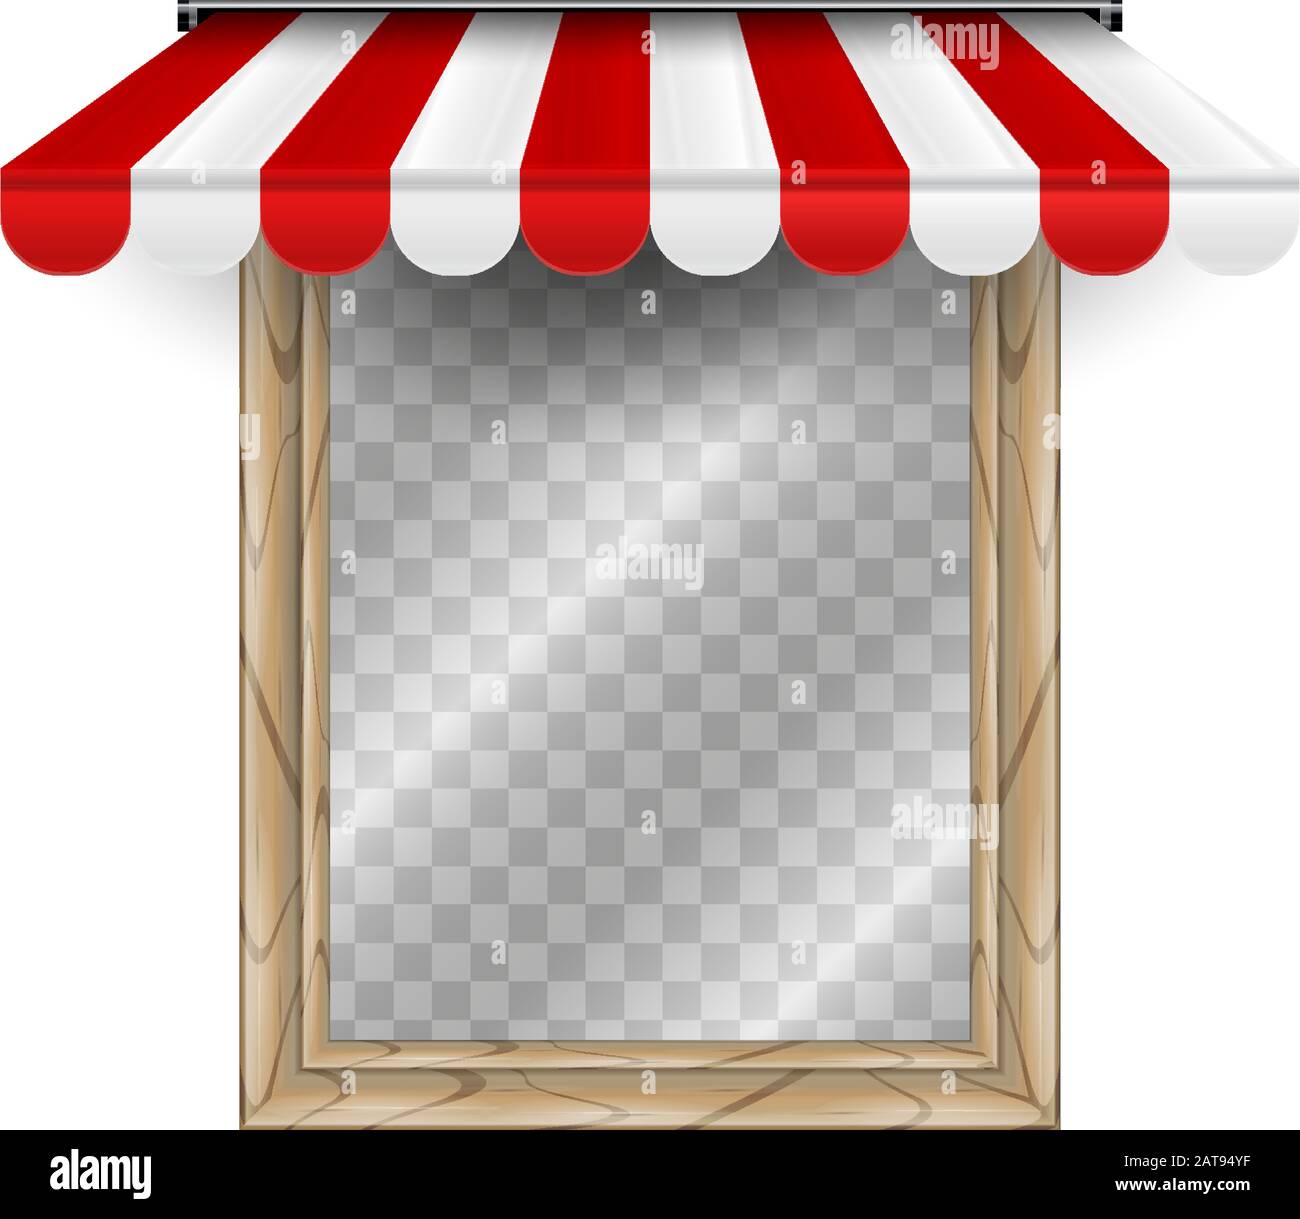 Straight striped awning above the window. Vector illustration. Wooden window with transparent background behind glass. Single wooden window frame. Stock Vector